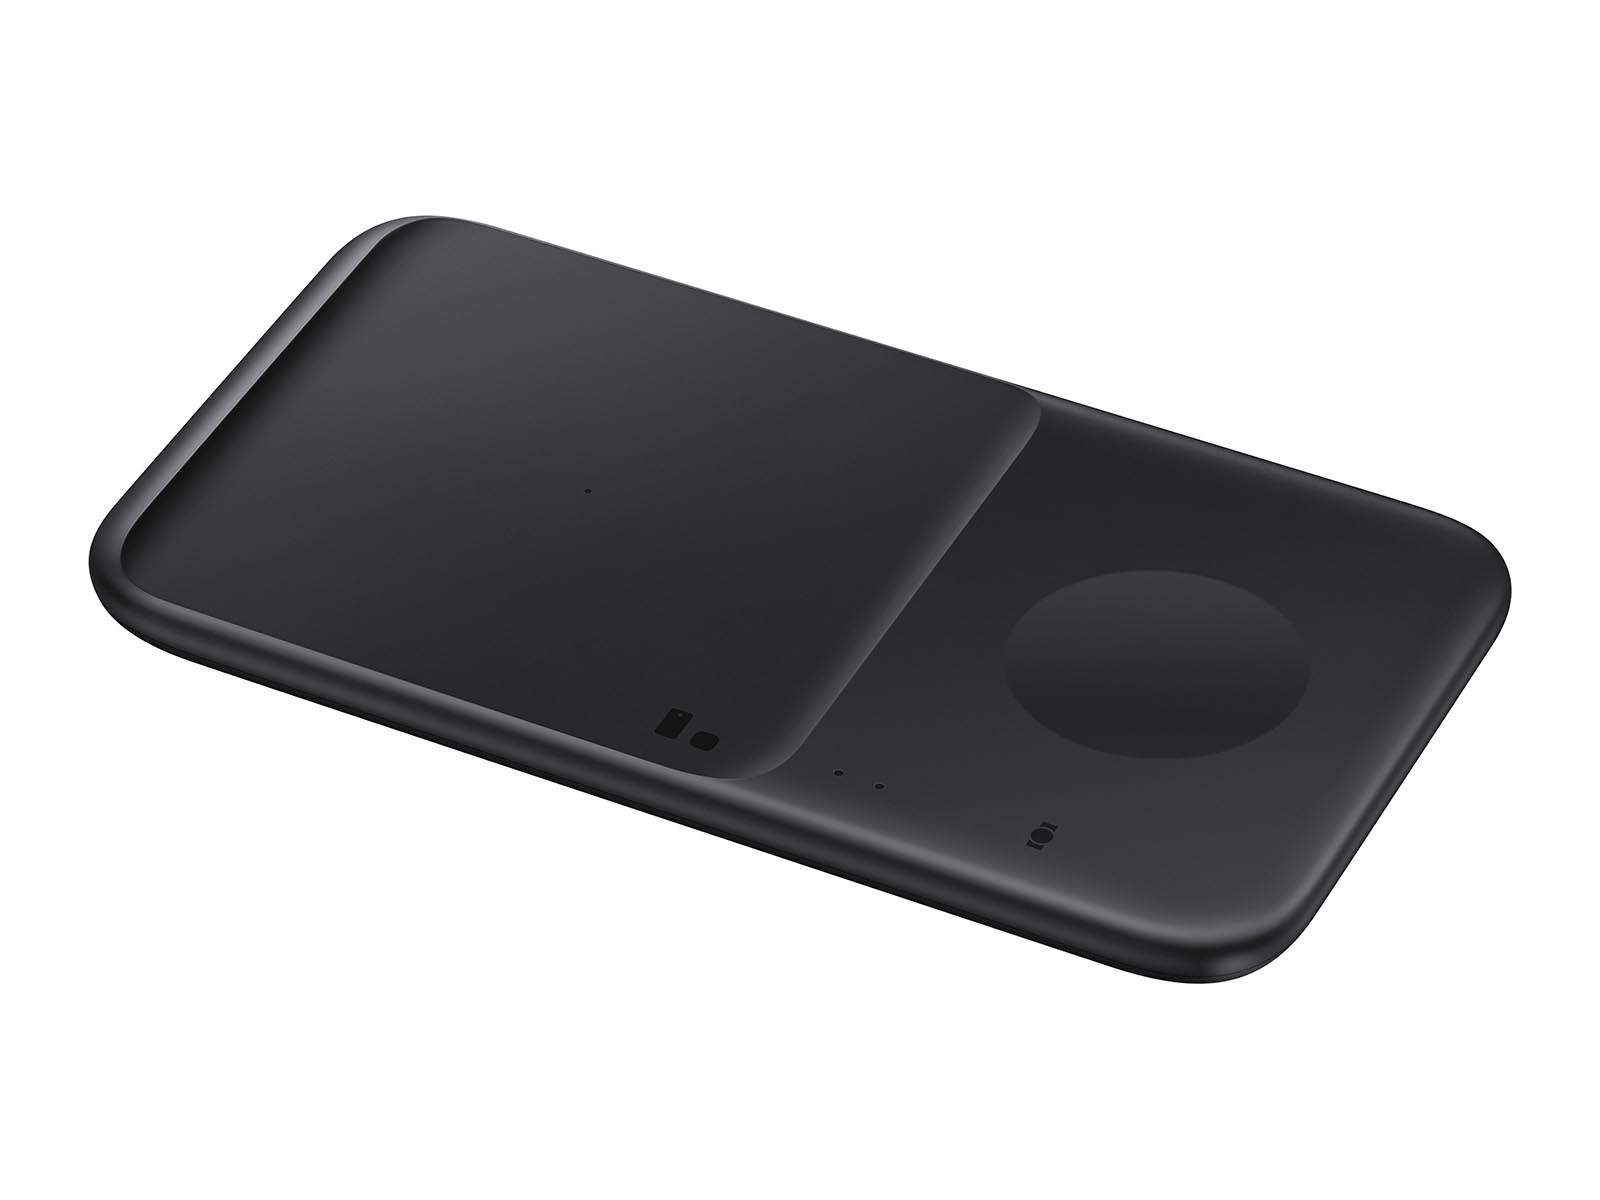 Wireless Charger Duo, Black Mobile Accessories - EP-P4300TBEGUS